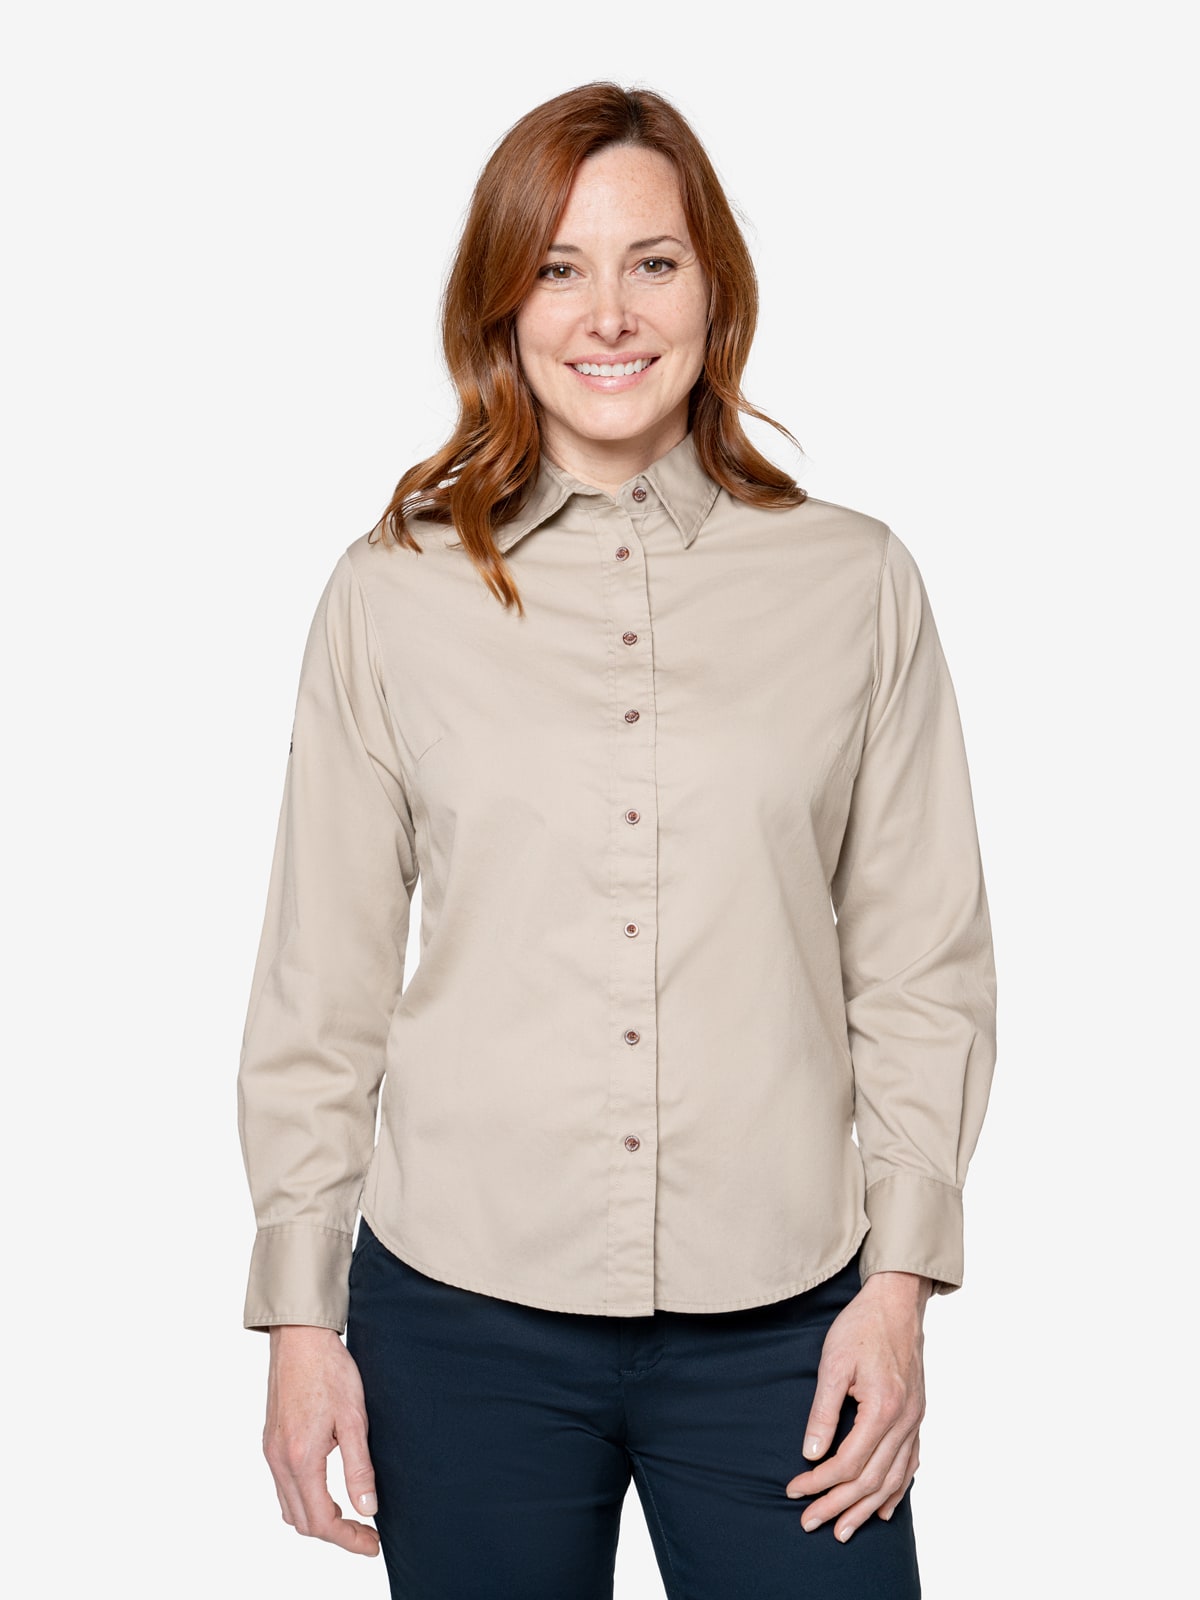 Insect Shield Women's Twill Work Shirt